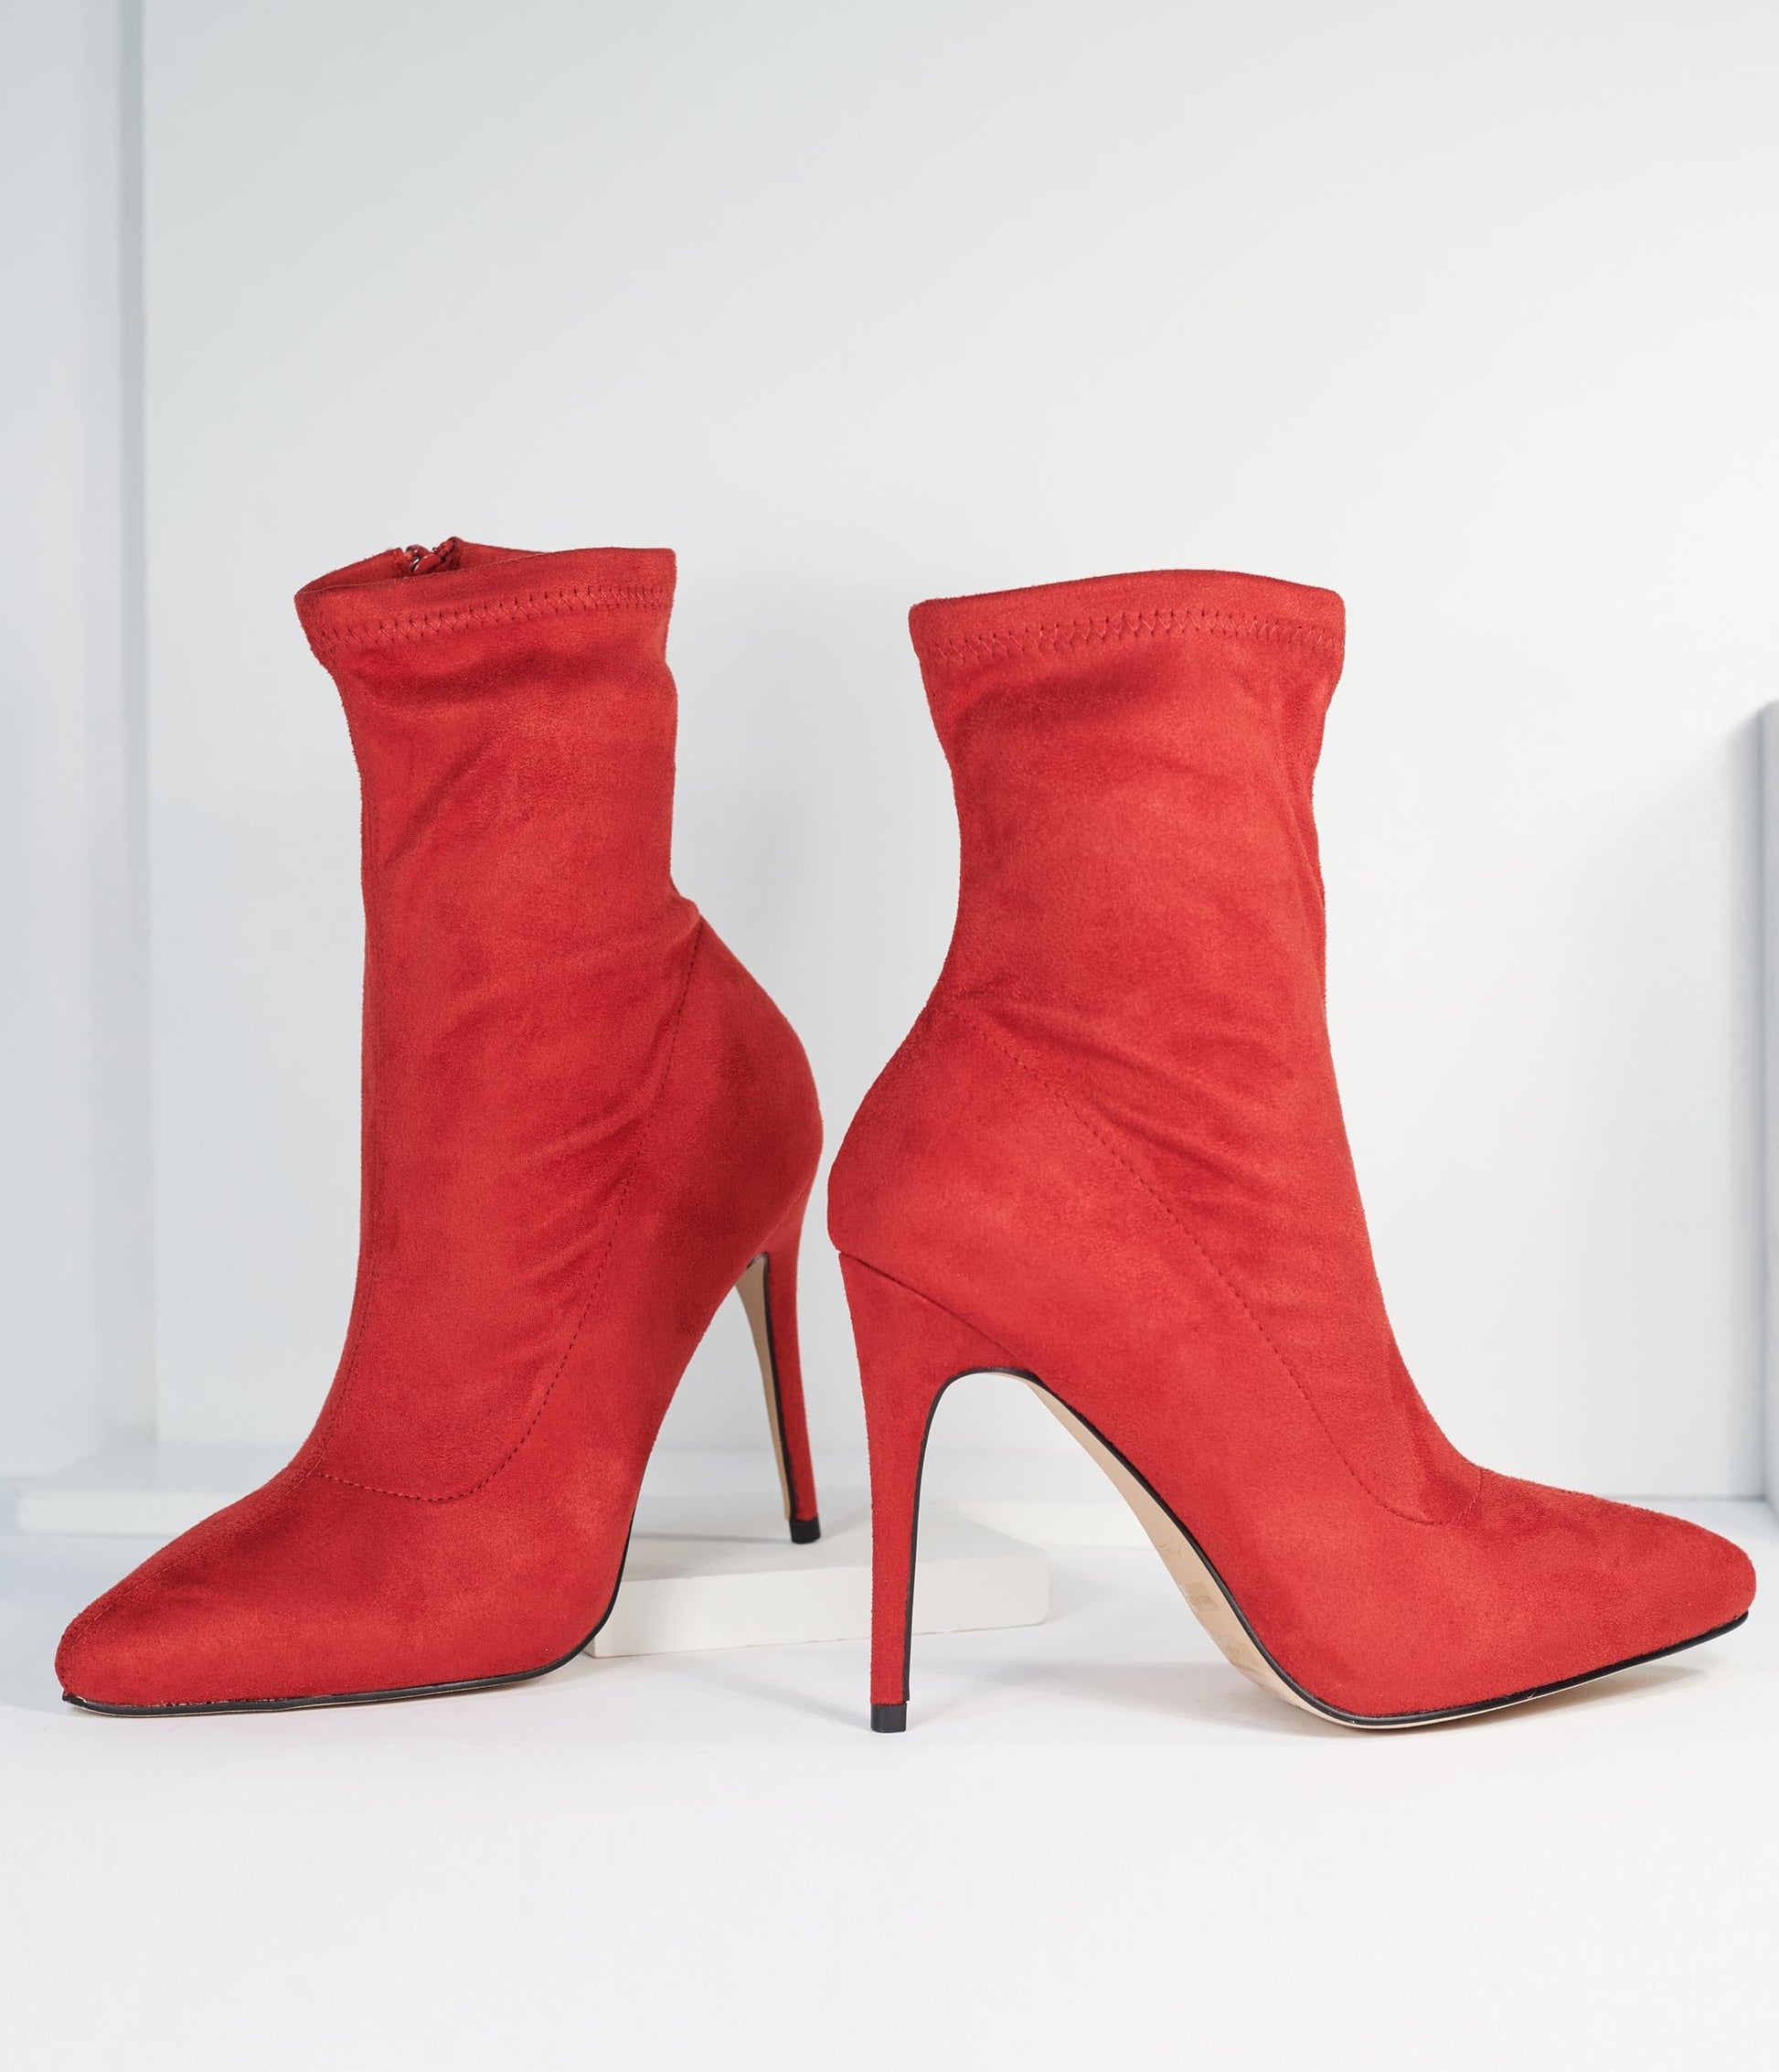 1990s Red Suede High Stiletto Ankle Boots